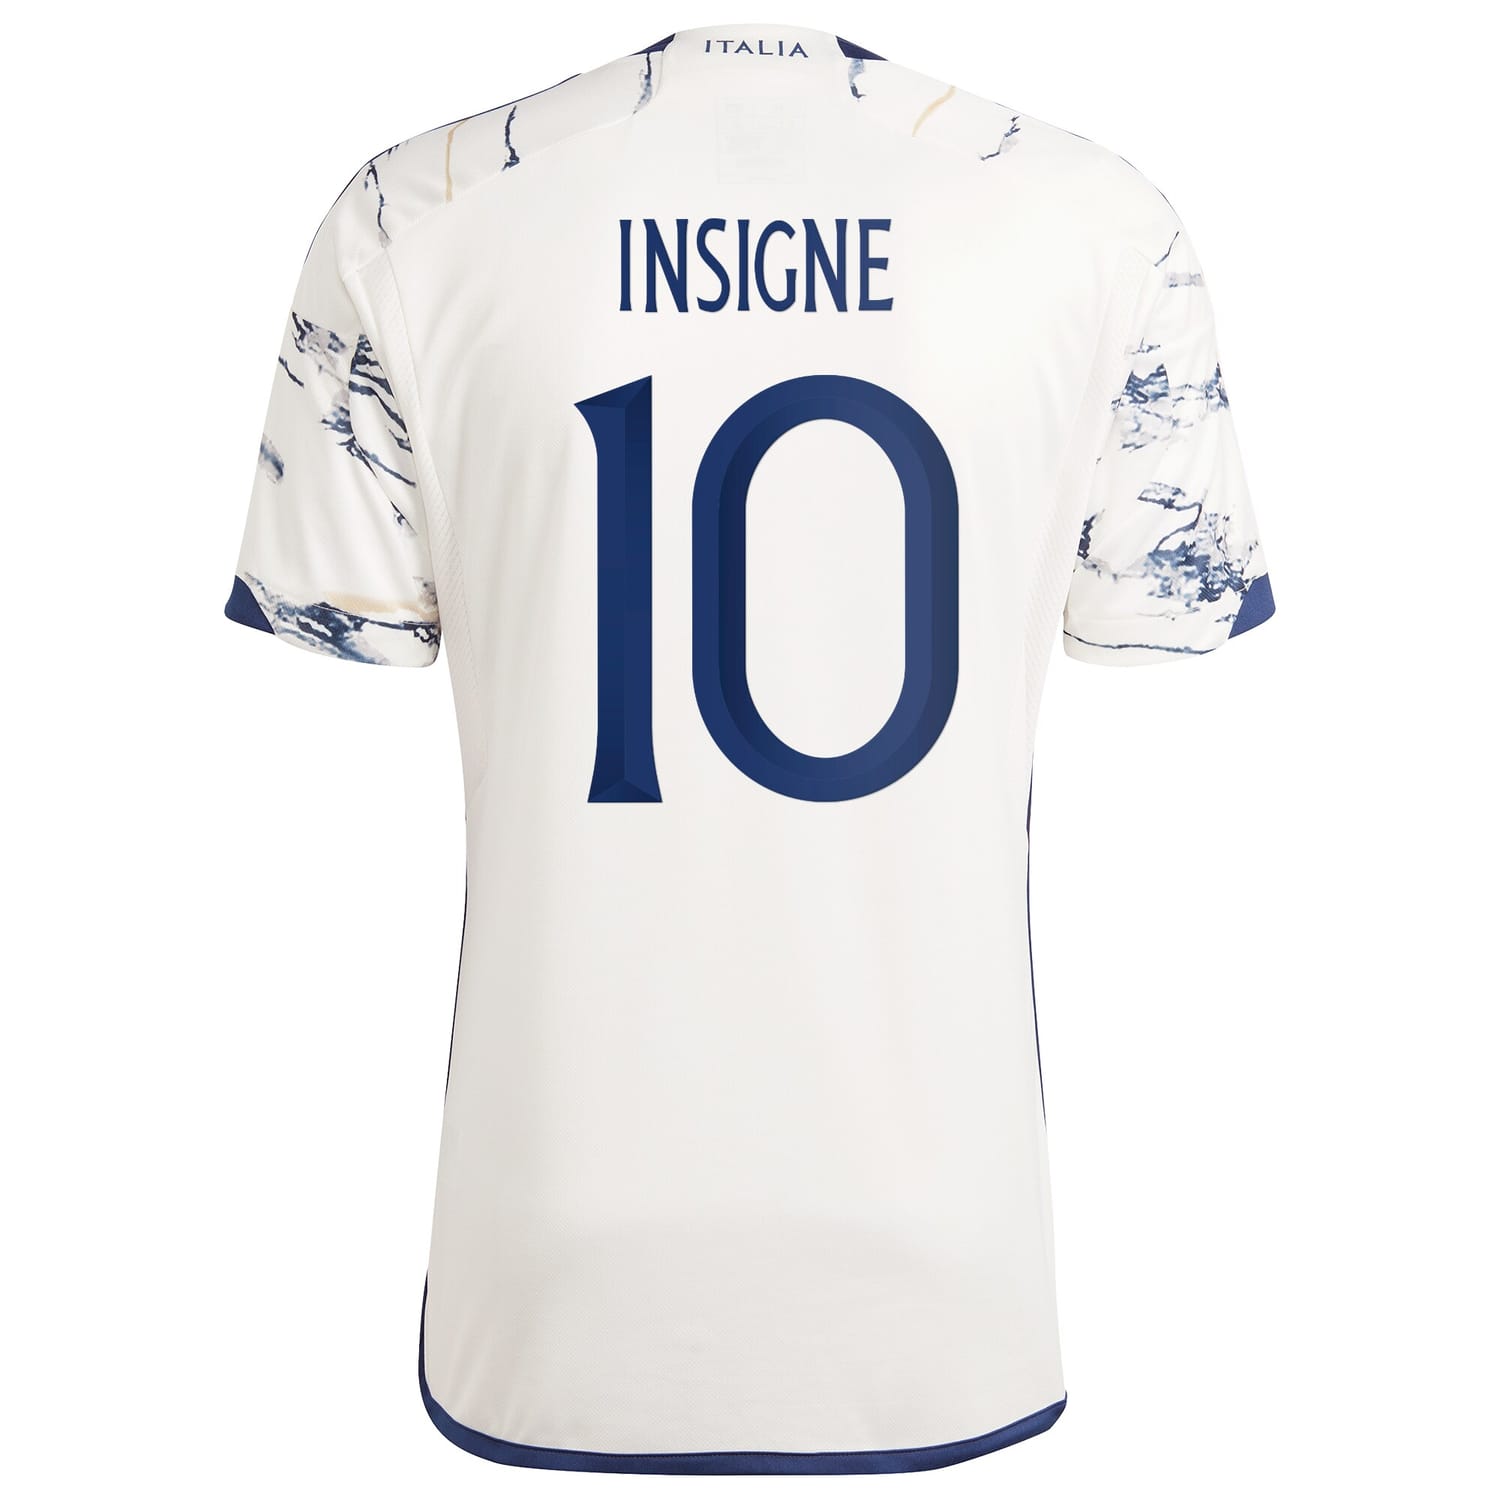 Italy National Team Away Jersey Shirt White 2023-24 player Lorenzo Insigne printing for Men